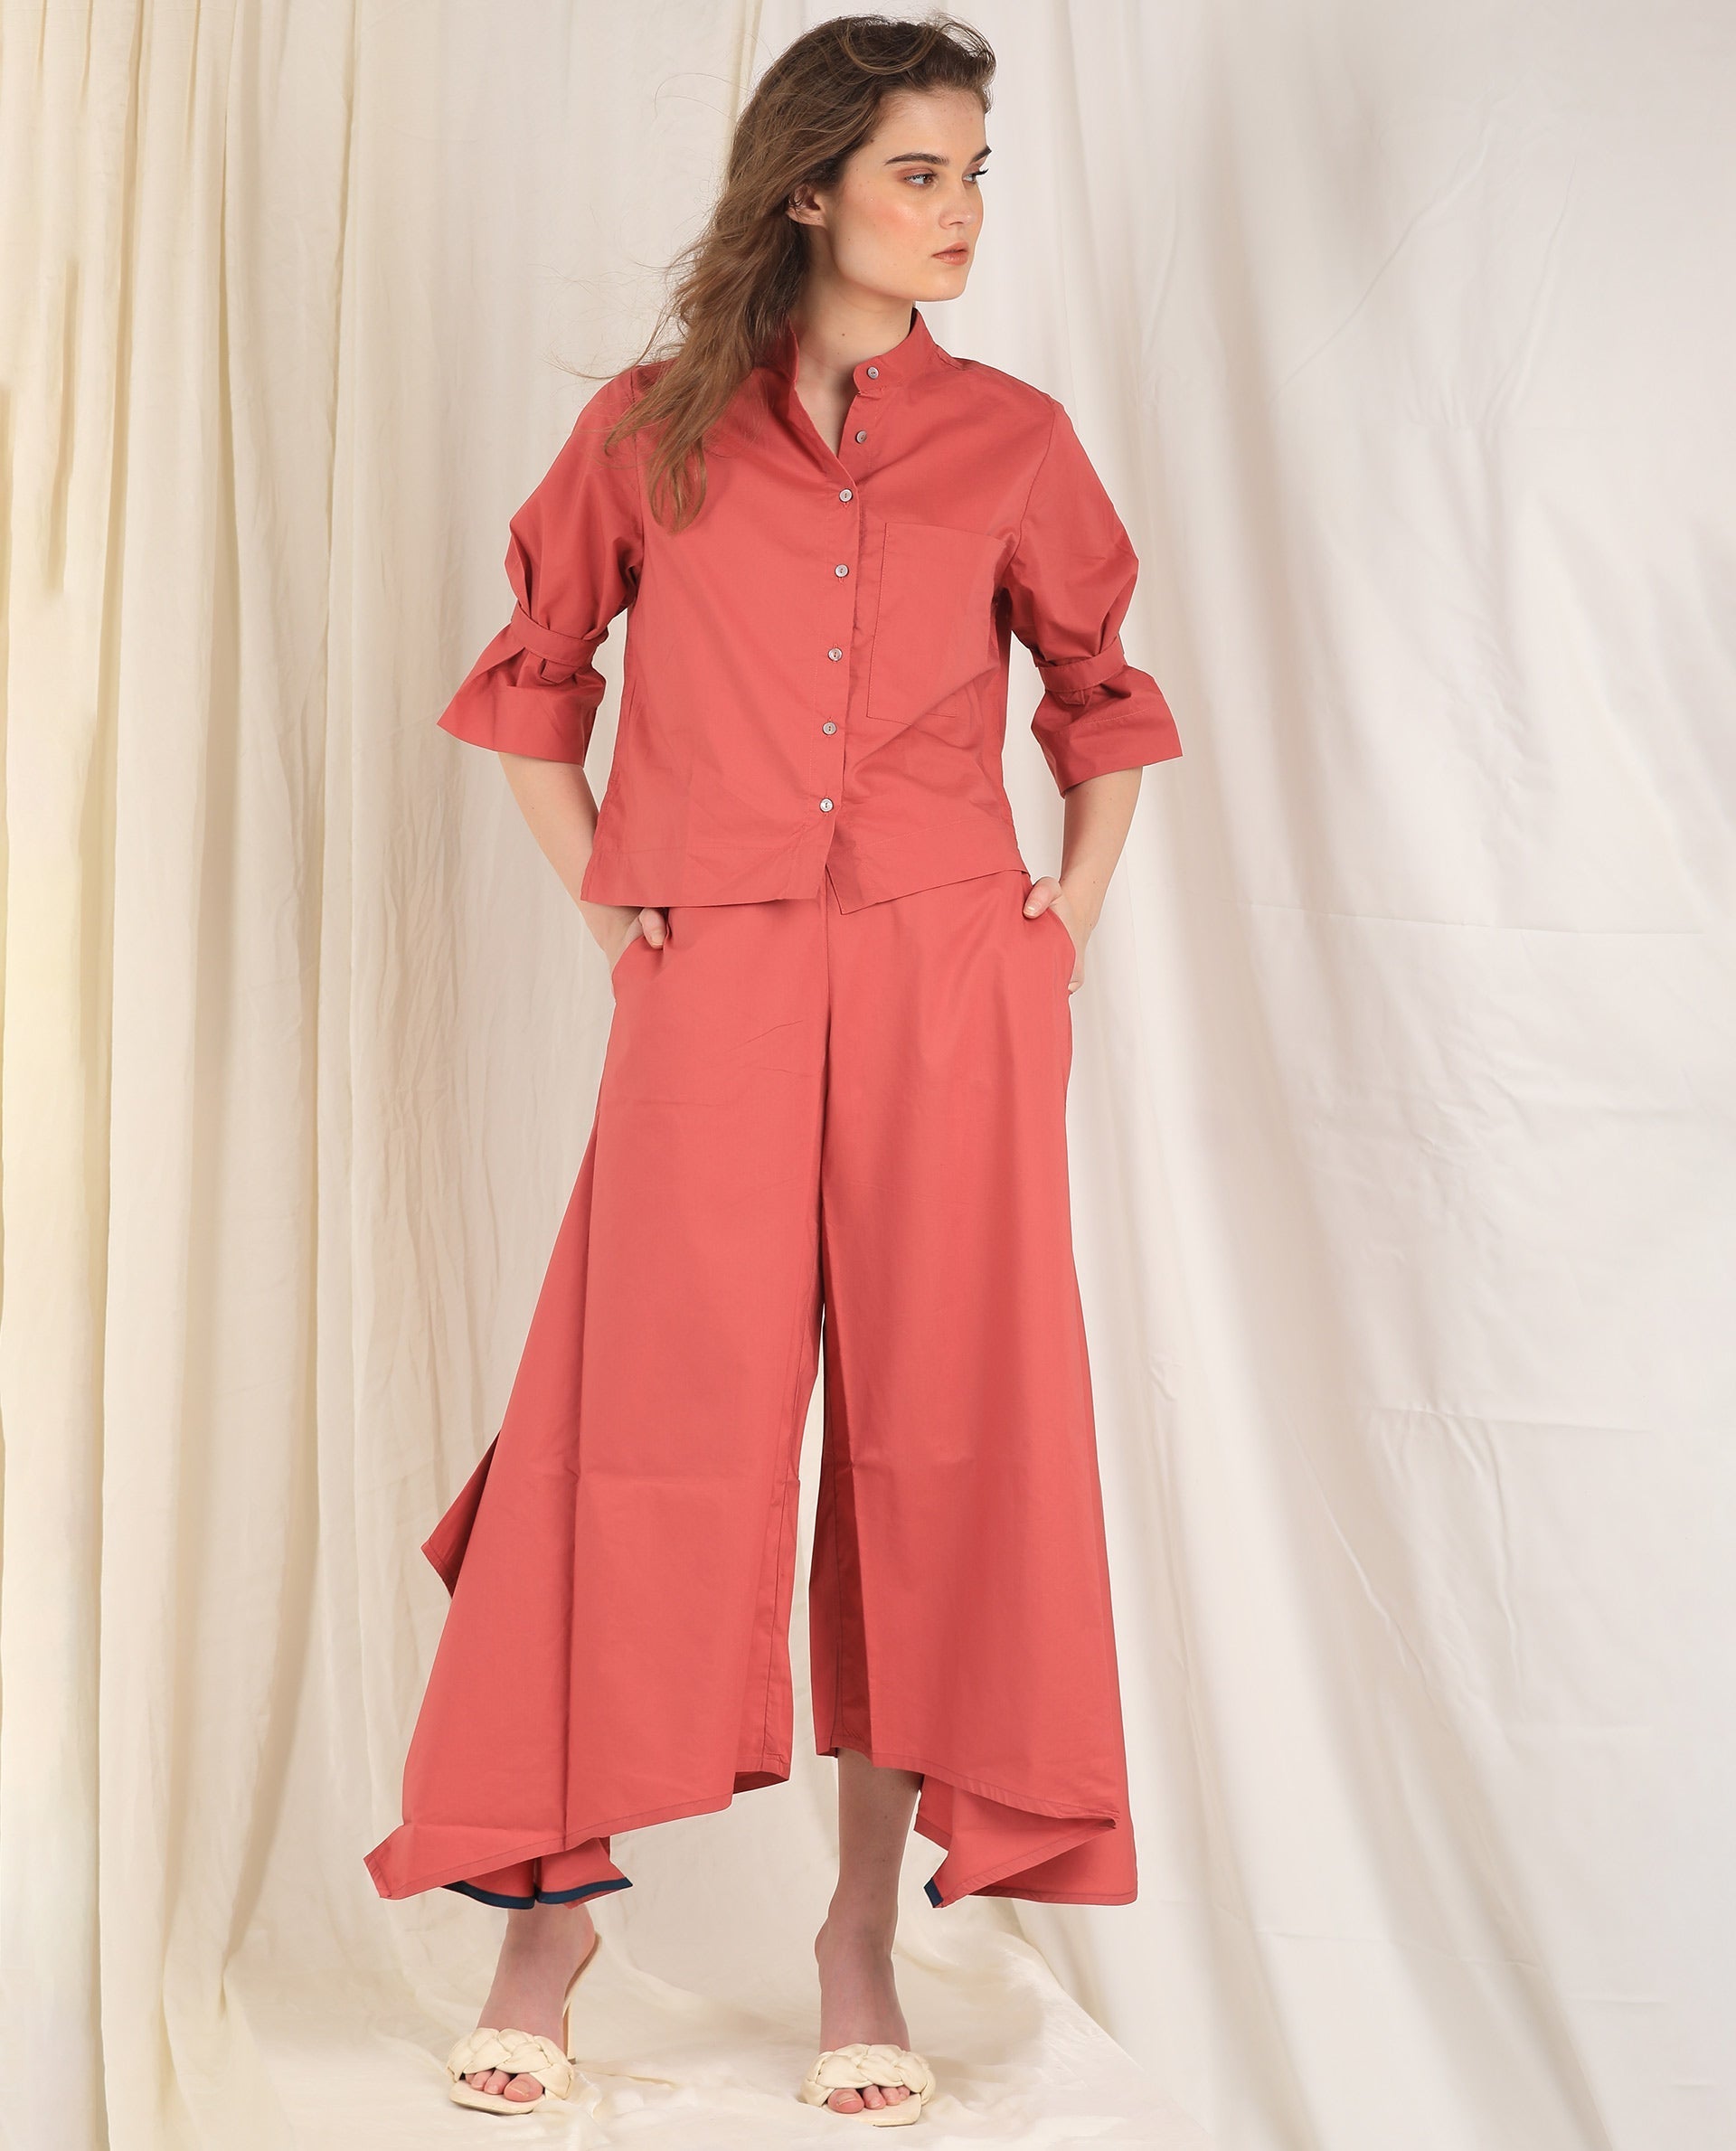 WOMEN'S KYOTO RED TROUSERS POLYESTER FABRIC FULL SLEEVES DRAWSTRING CLOSURE SOLID